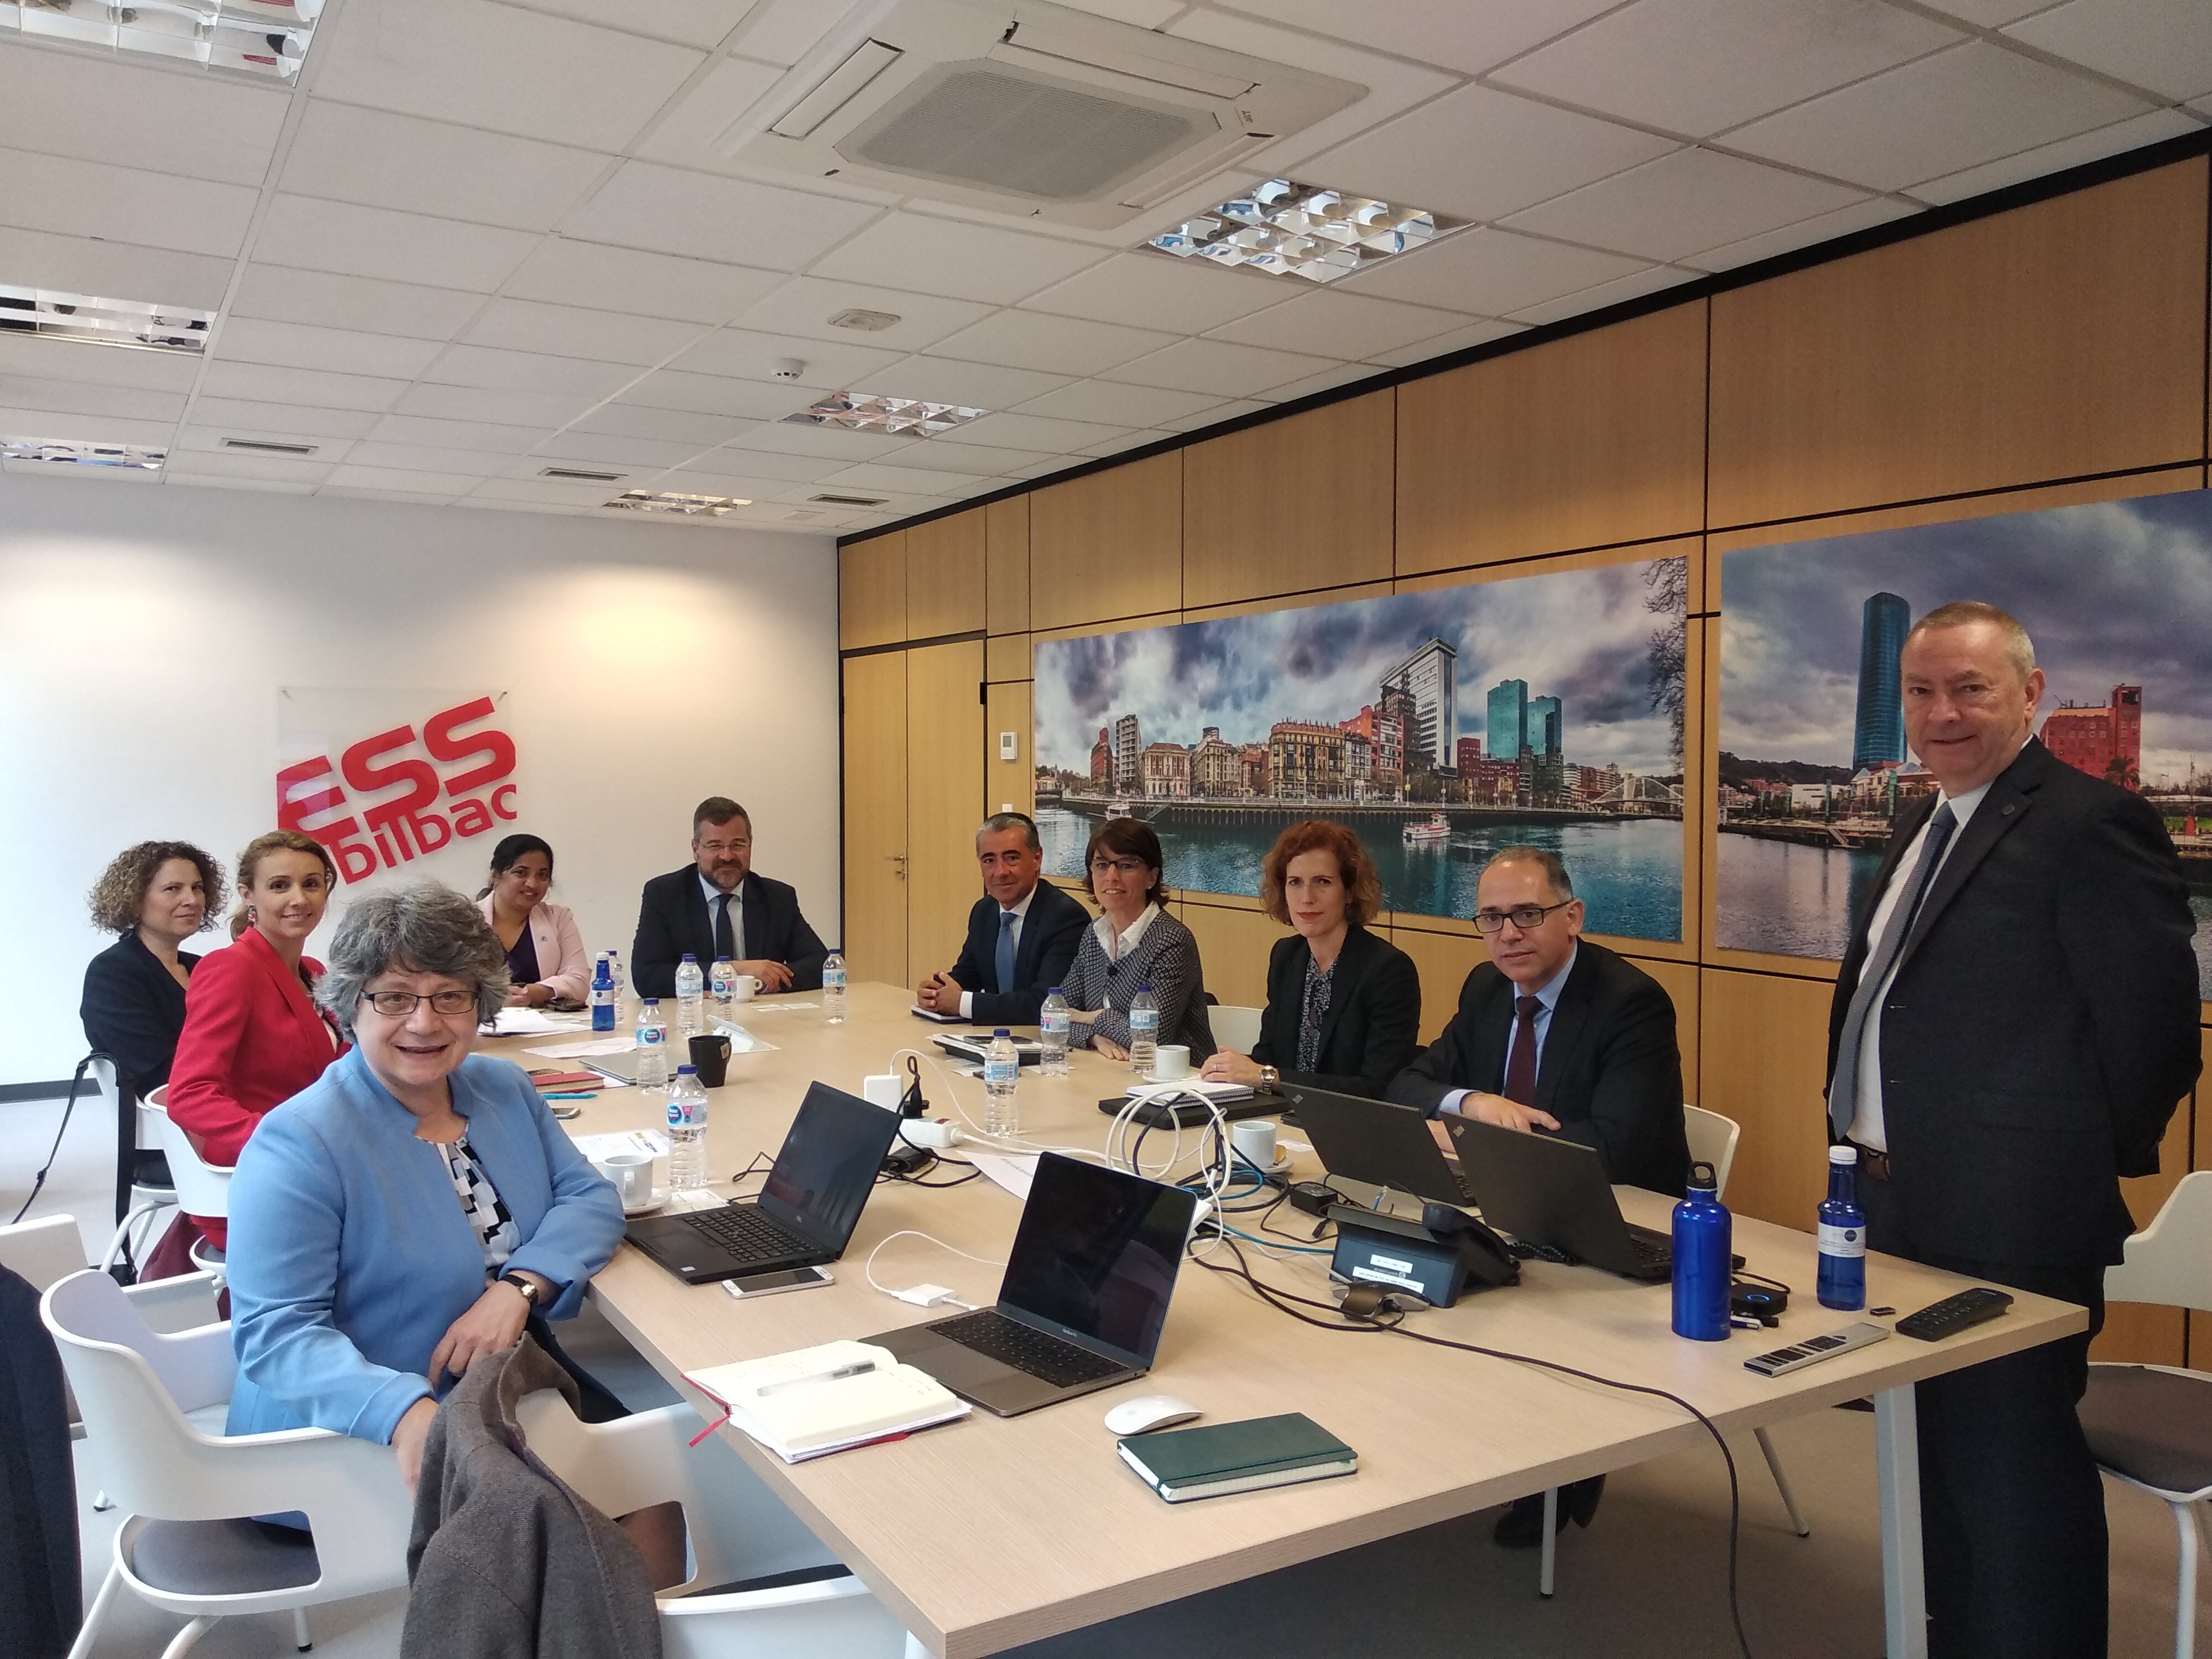 Fermilab, ESS Bilbao and Basque Government representatives to explore joint ways of collaboration